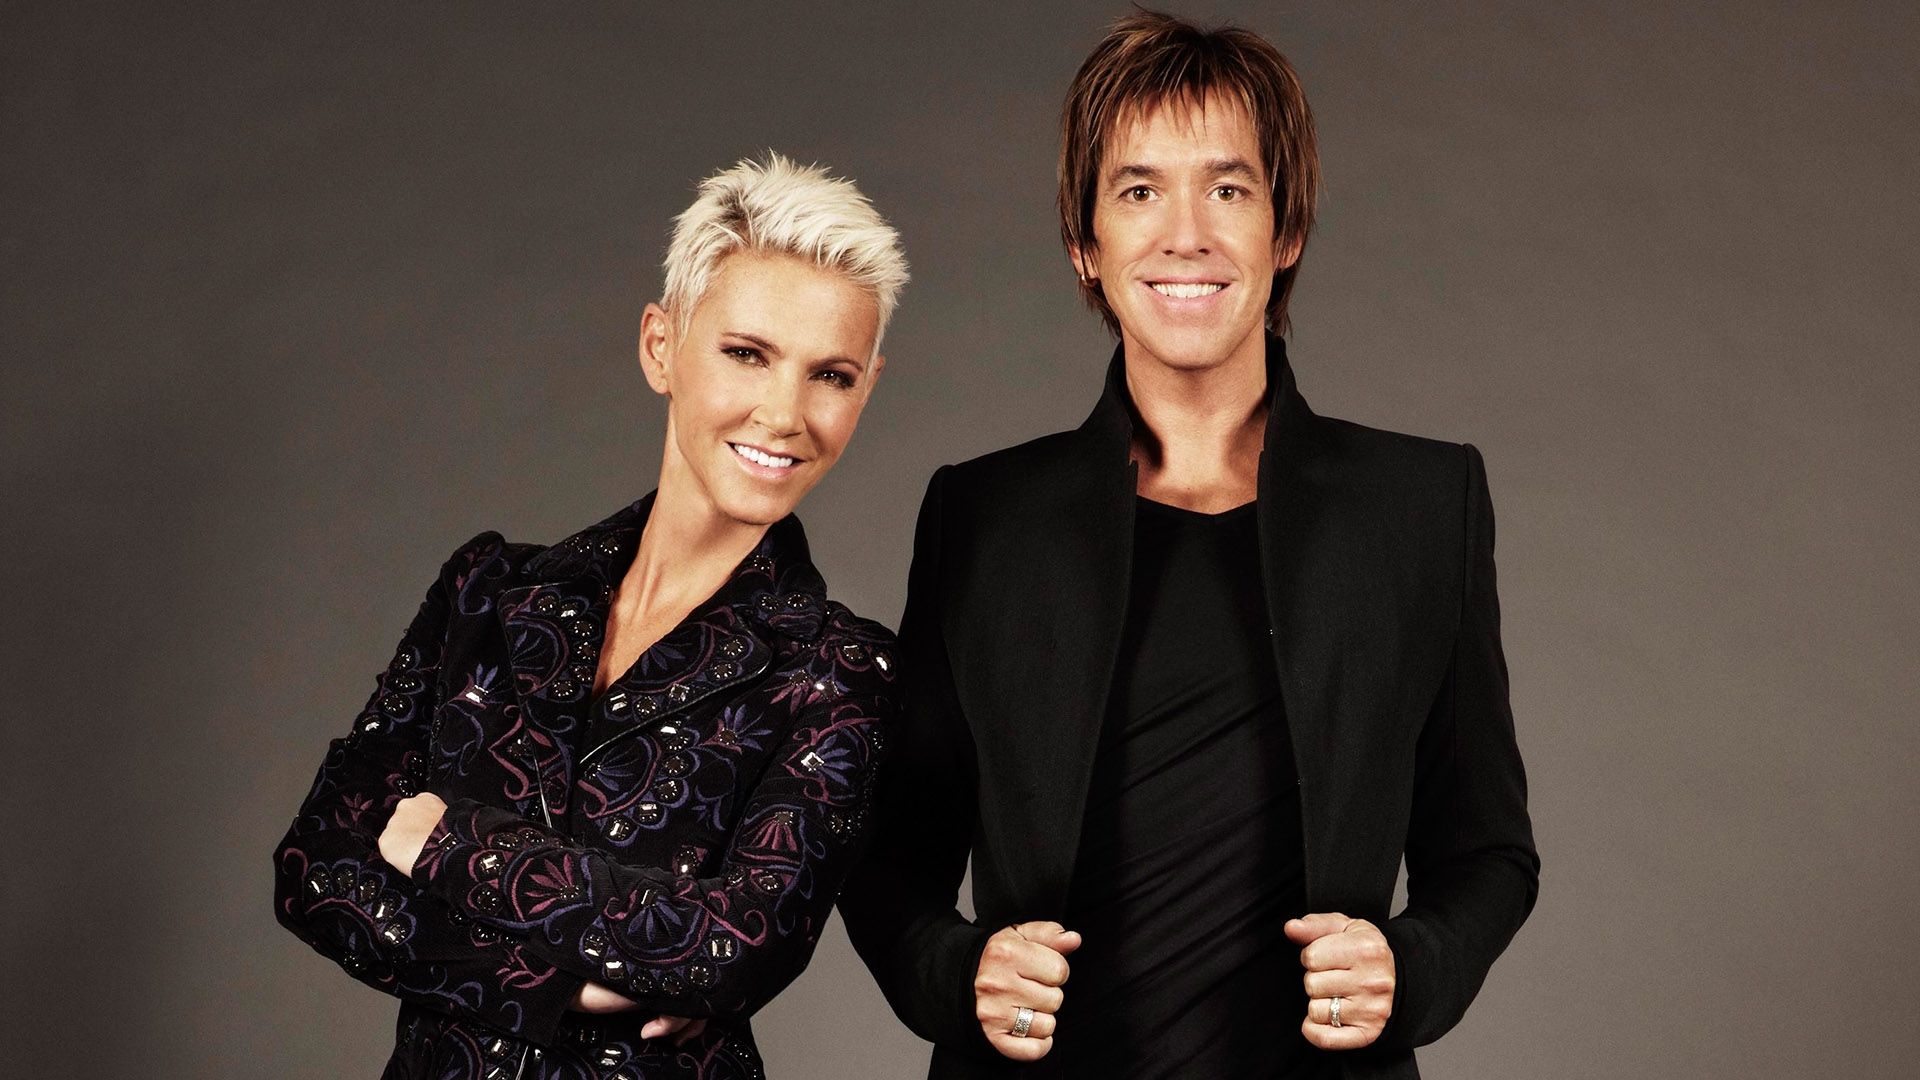 Download Wallpaper 1920x1080 roxette, band, members, look, photo